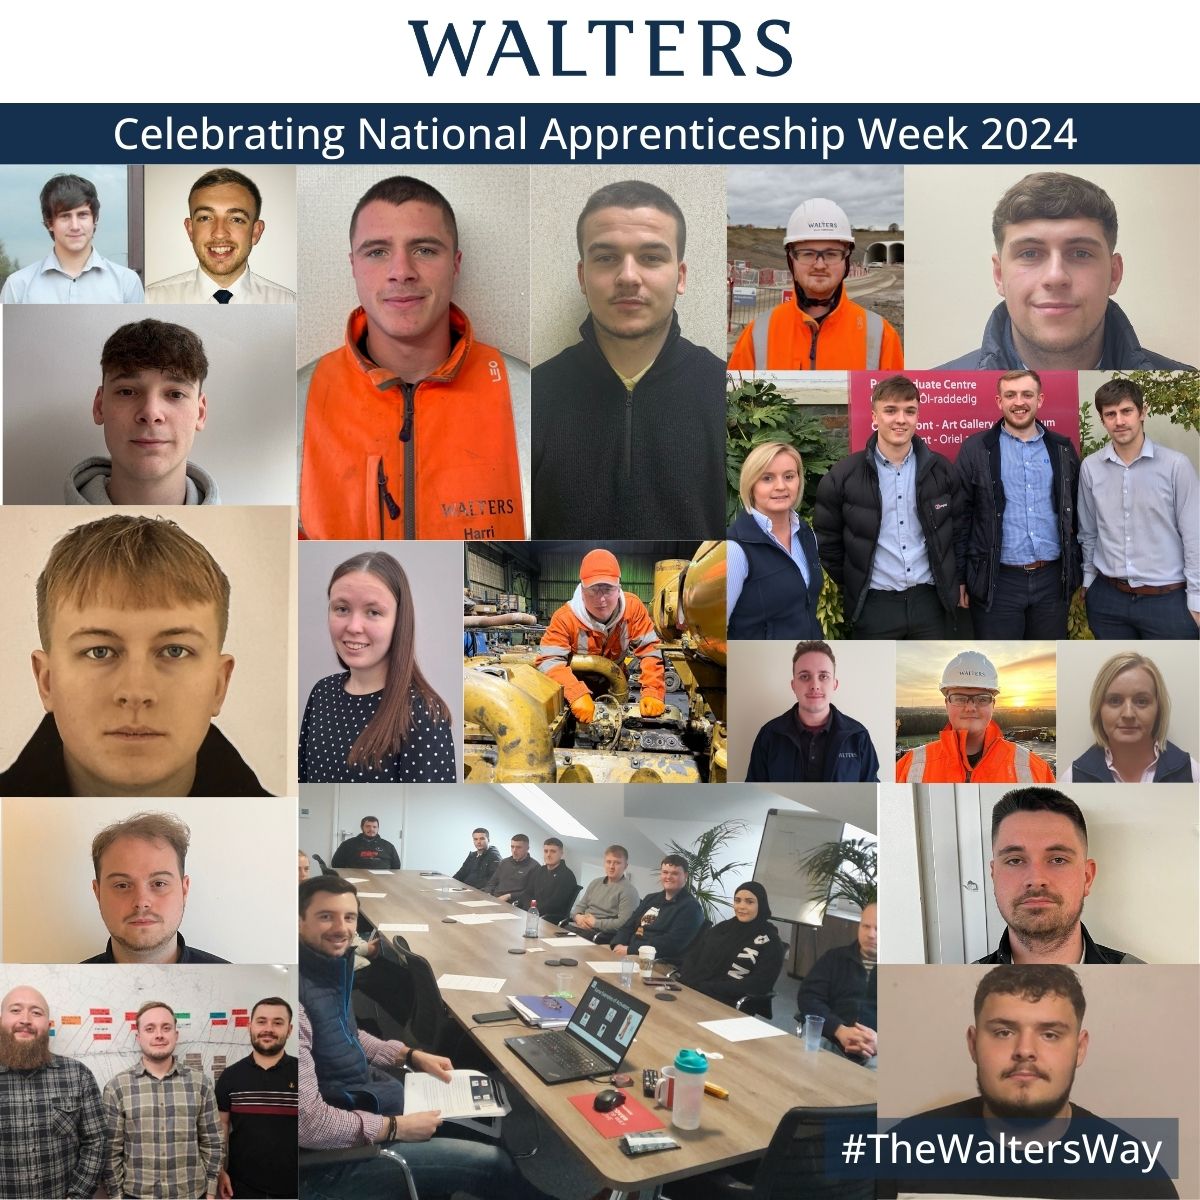 We're celebrating National Apprenticeship Week 2024 for all our Apprentices. #TheWaltersWay #NAW2024 #skillsforlife #AWWwales #nationalapprenticeshipweek #Apprentices #Apprenticeships #cybersecurity #CareersinConstruction #constructionplant #machinemaintenanceconstruction